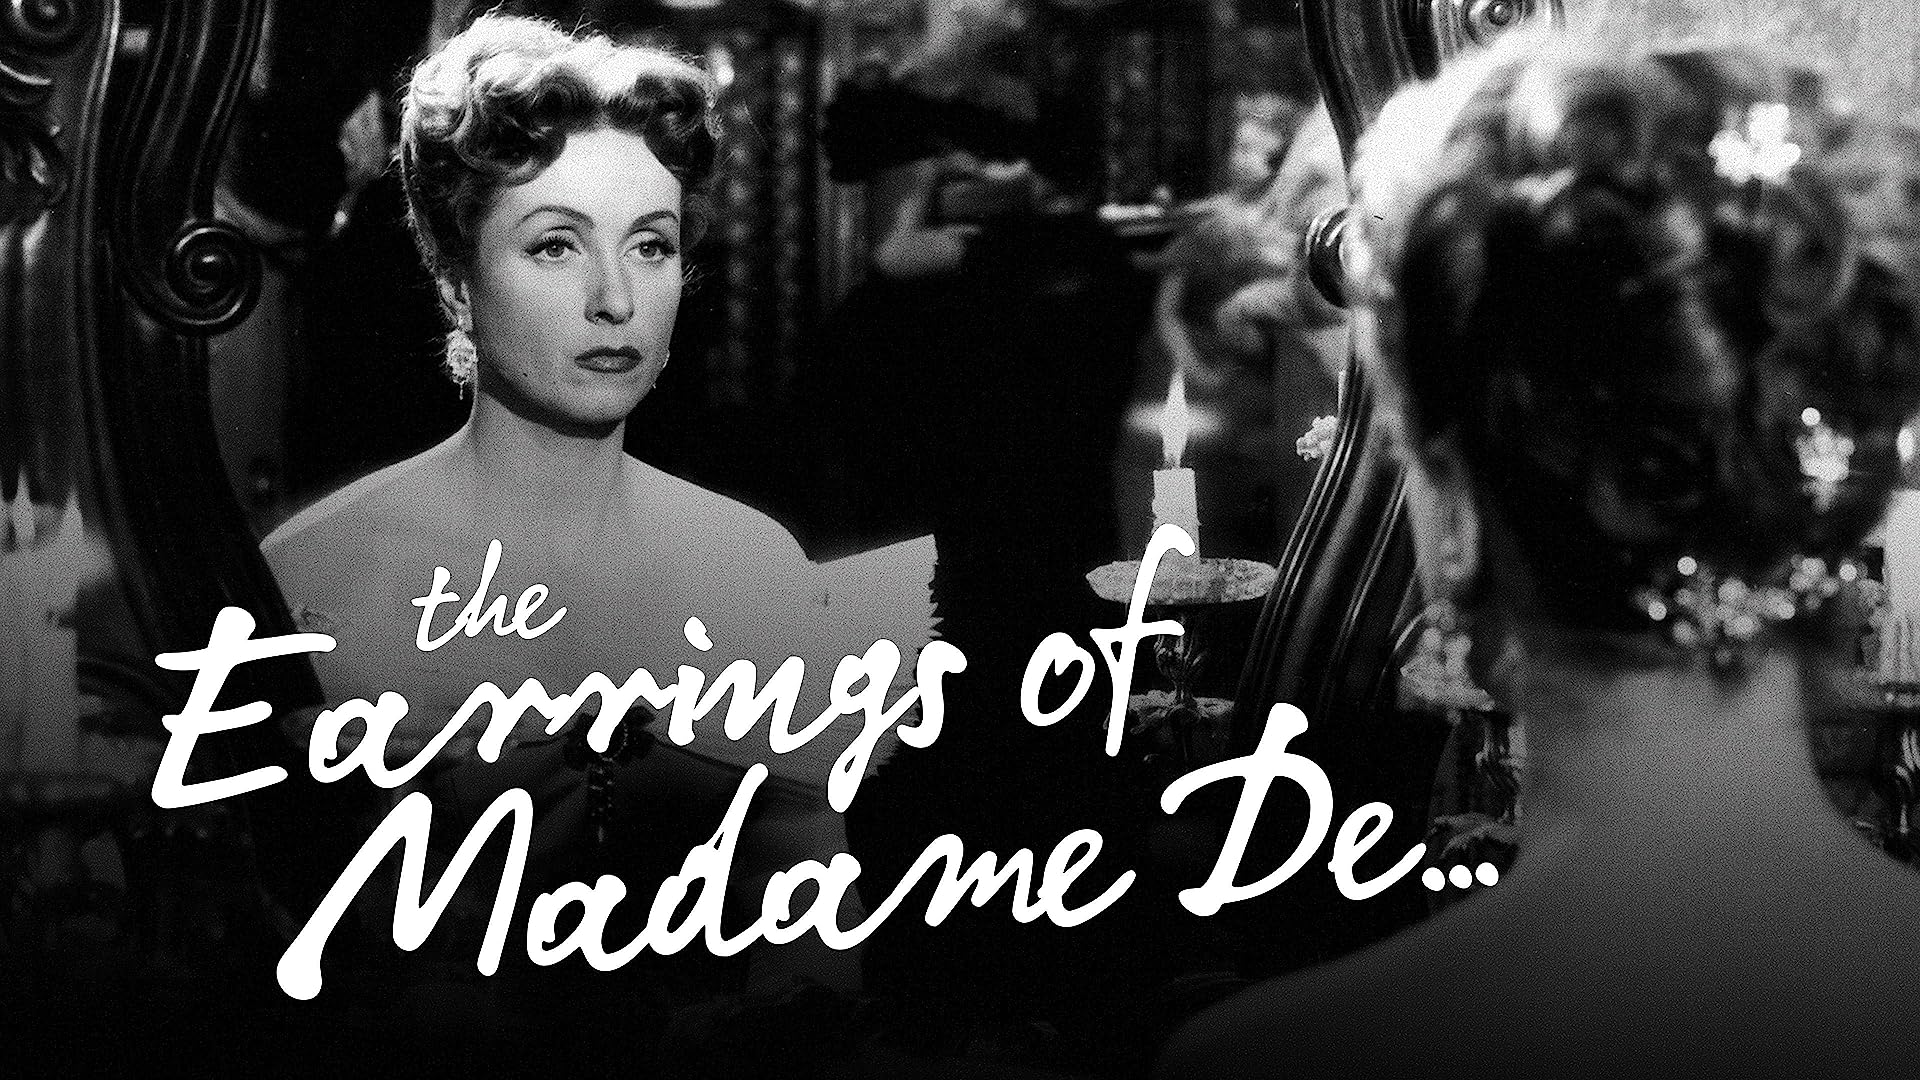 42-facts-about-the-movie-the-earrings-of-madame-de